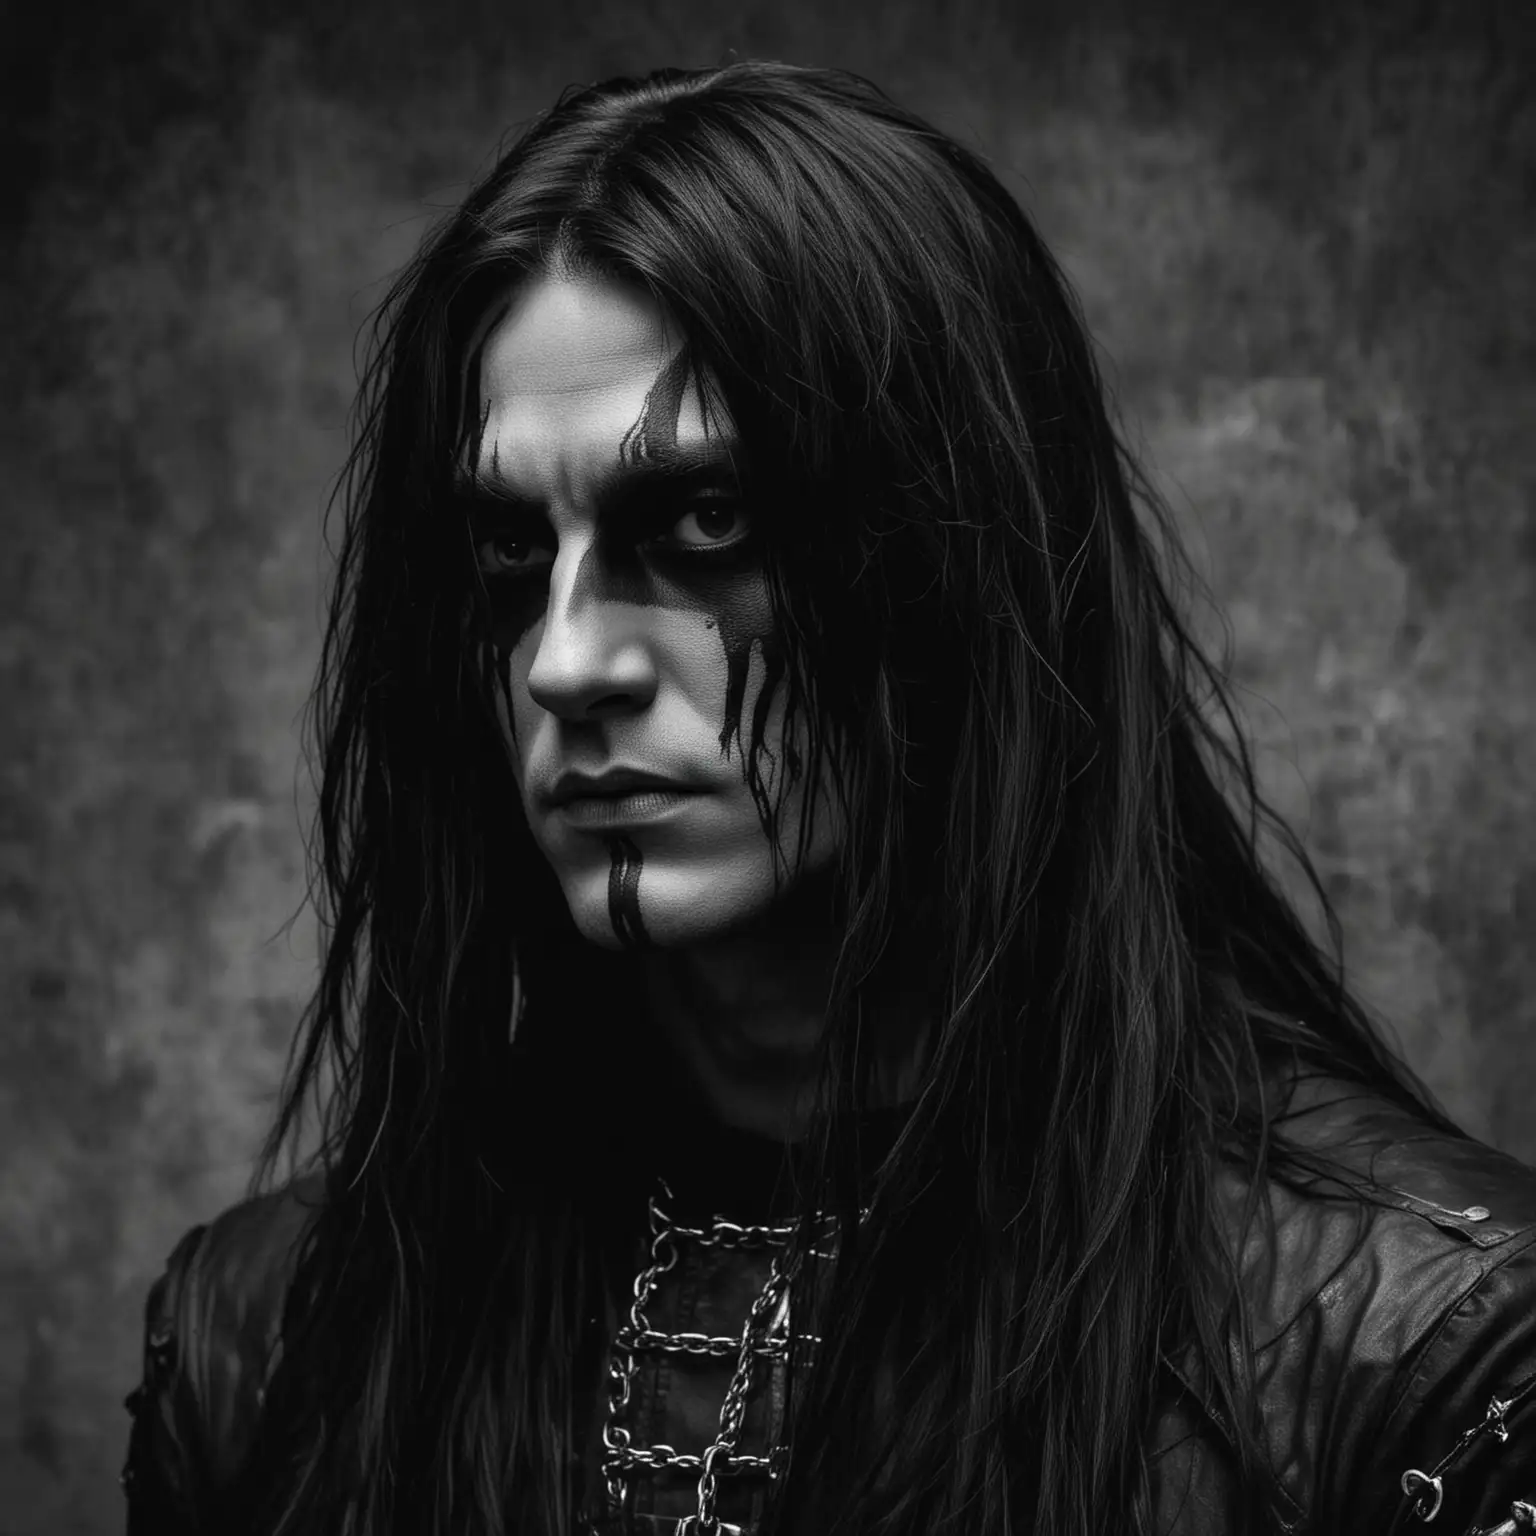 A blackmetalhead man with long black hair. The image should be inspire by 50 Shades of gray Aesthetics.